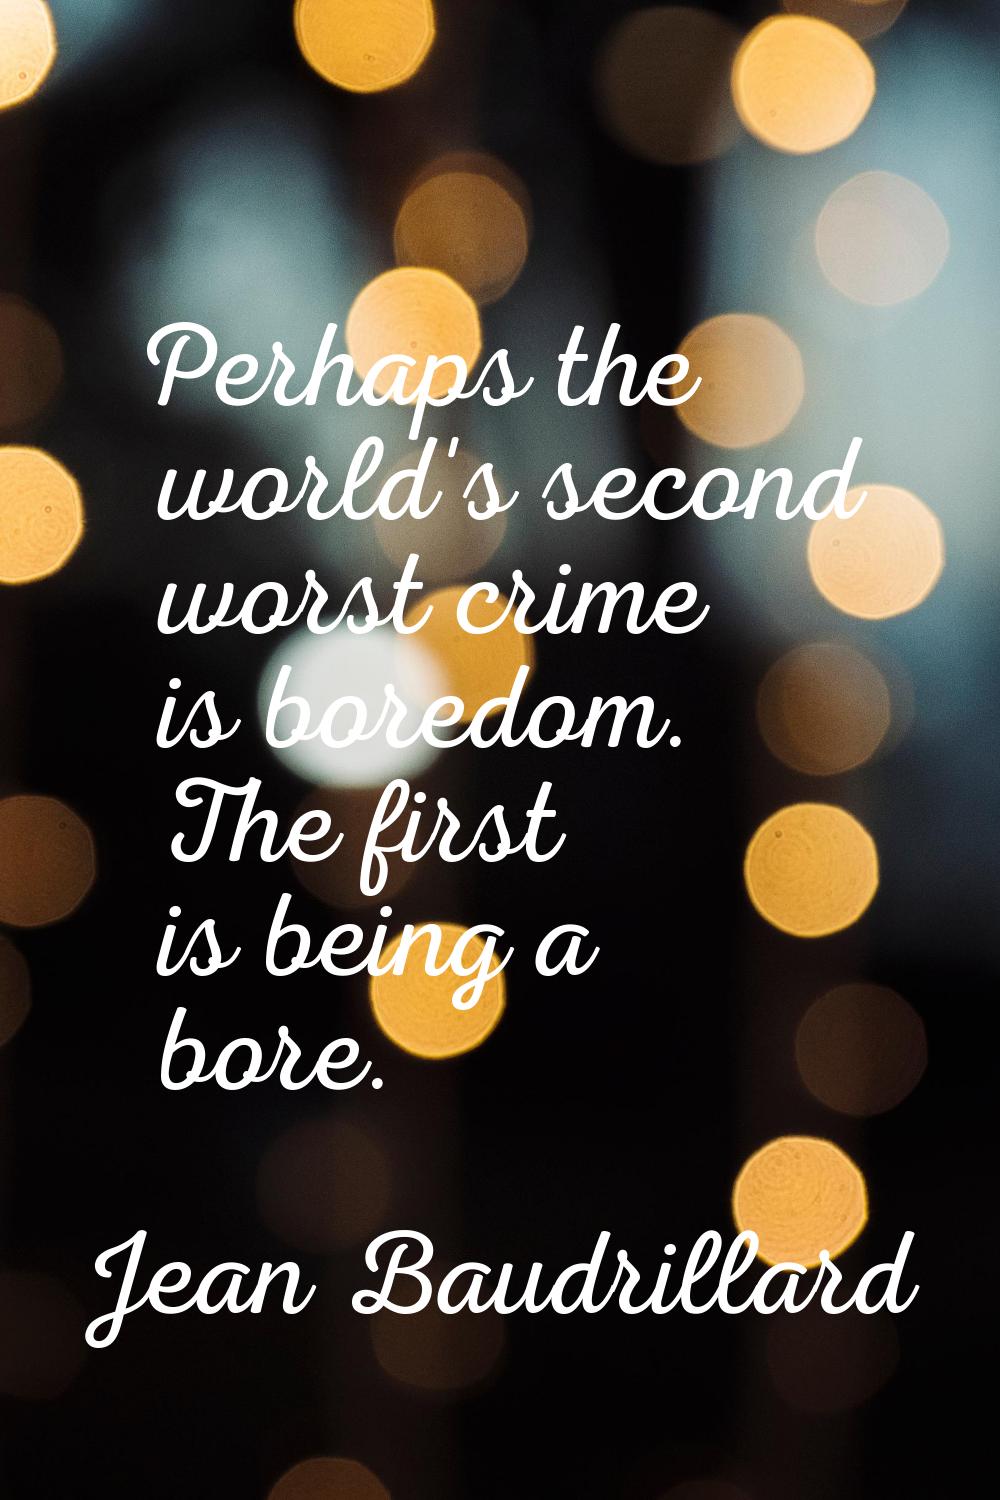 Perhaps the world's second worst crime is boredom. The first is being a bore.